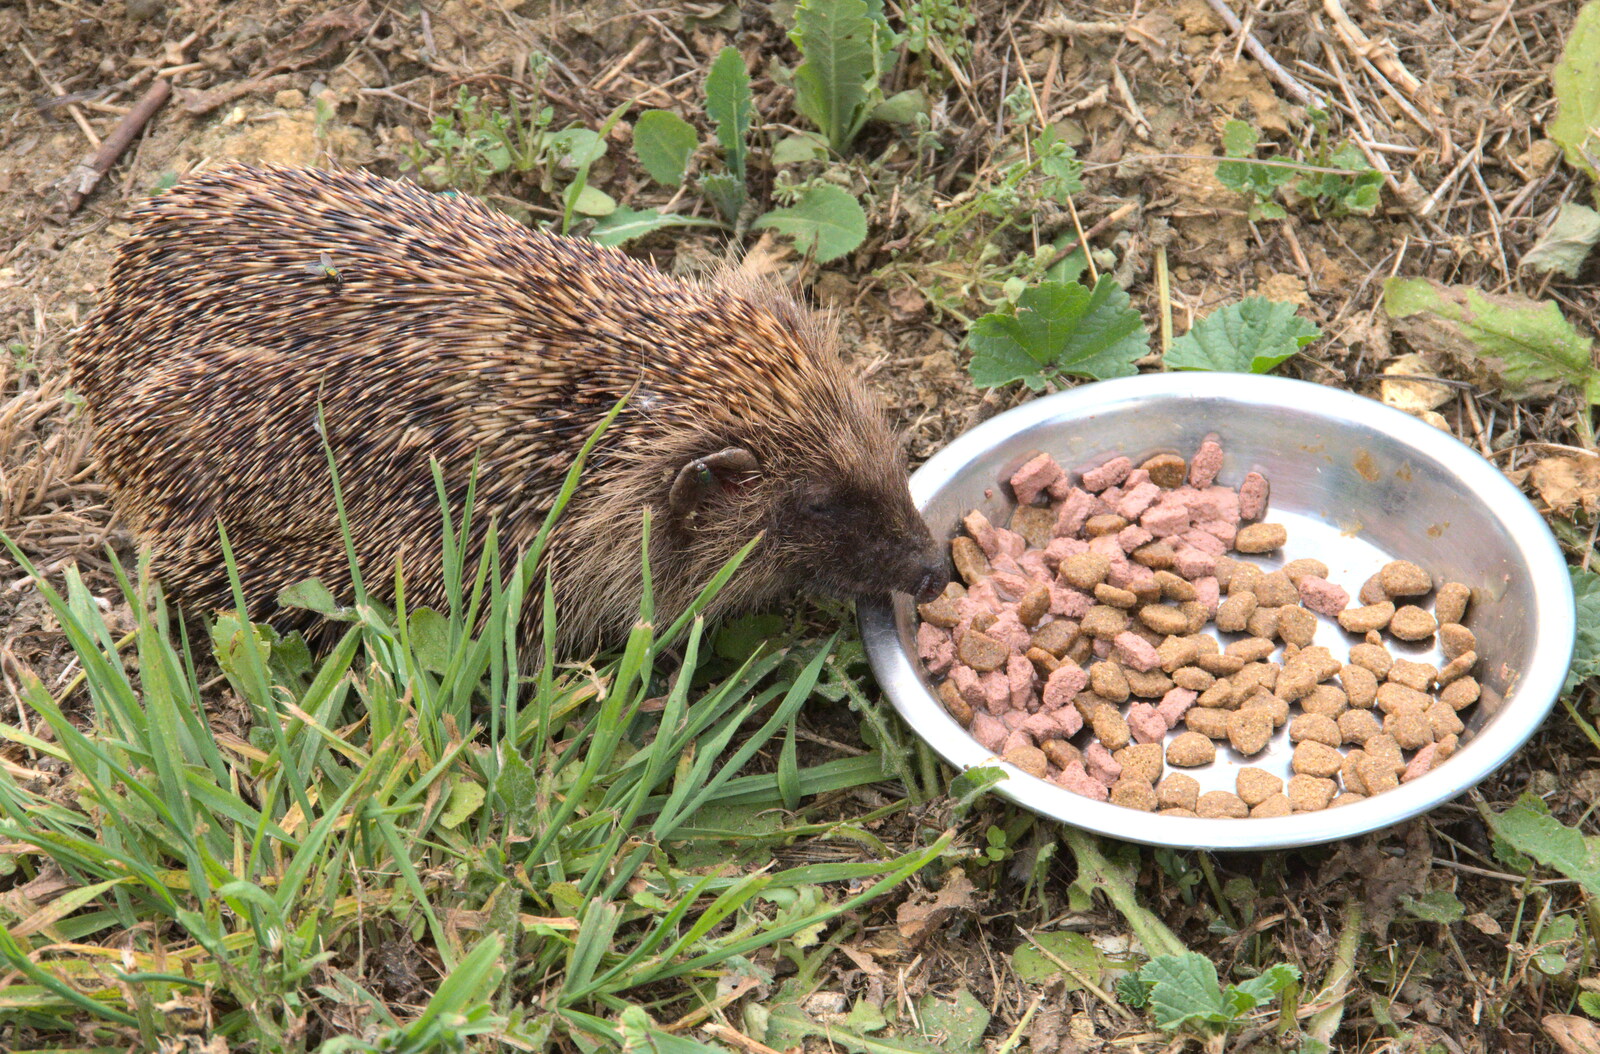 We give it some cat food, which cheers it up no end from Closed-Down Shops, Hedgehogs and Chamomile, Brome and Diss - 2nd August 2020